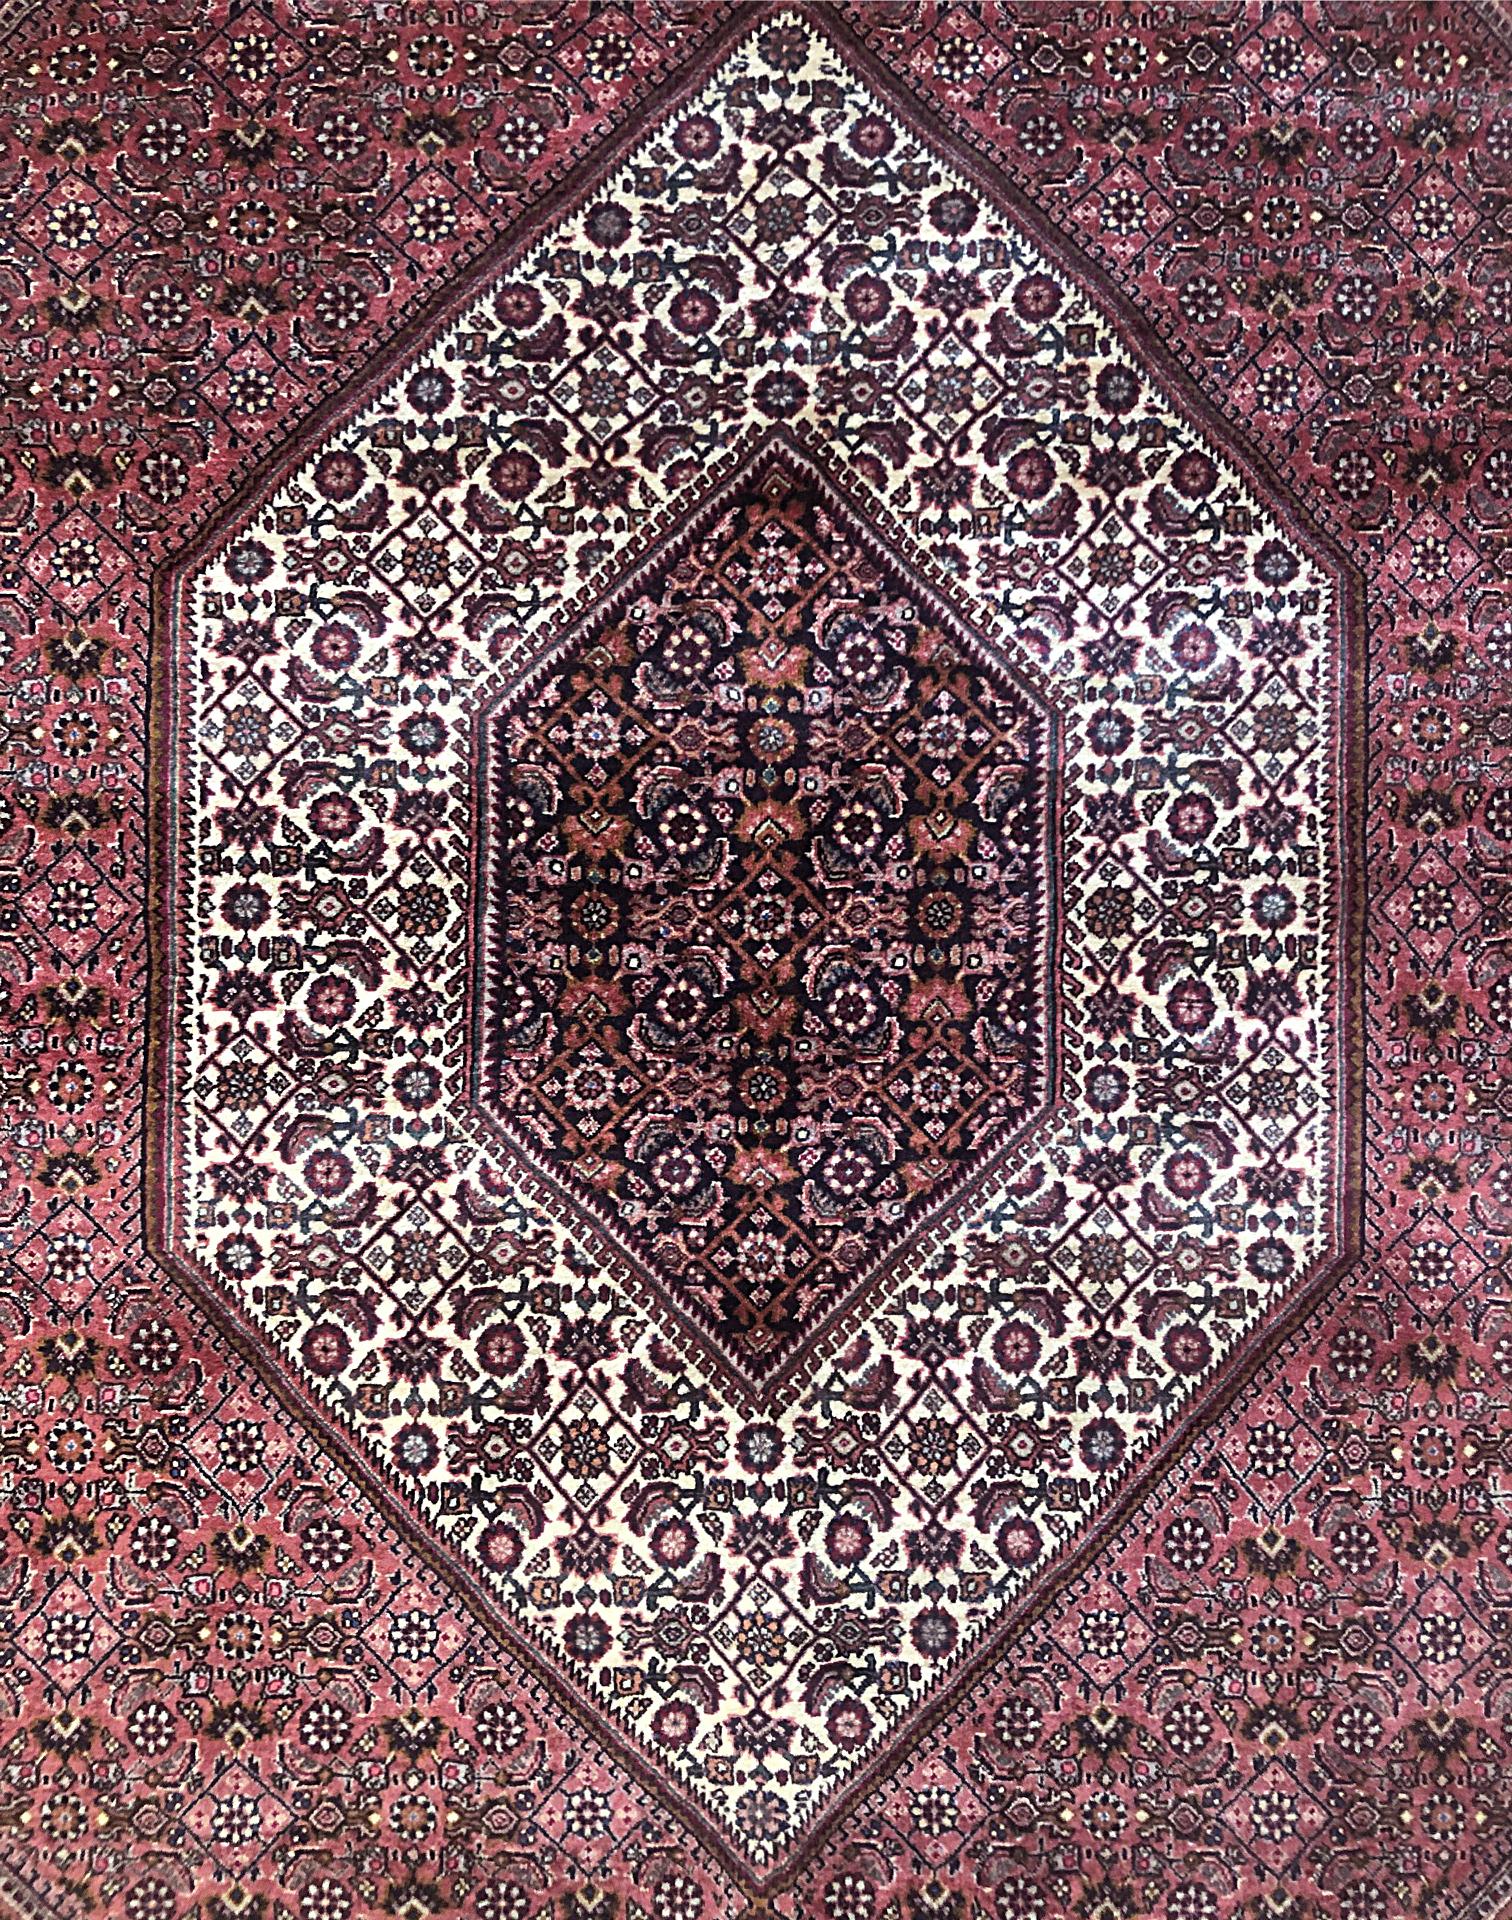 This piece is a handmade Persian Bijar rug with diamond medallion. This piece has wool with cotton foundation. The base color is red and cream, with cream border. Bijar rugs are well-known for their craftsmanship and design. The heavy wool